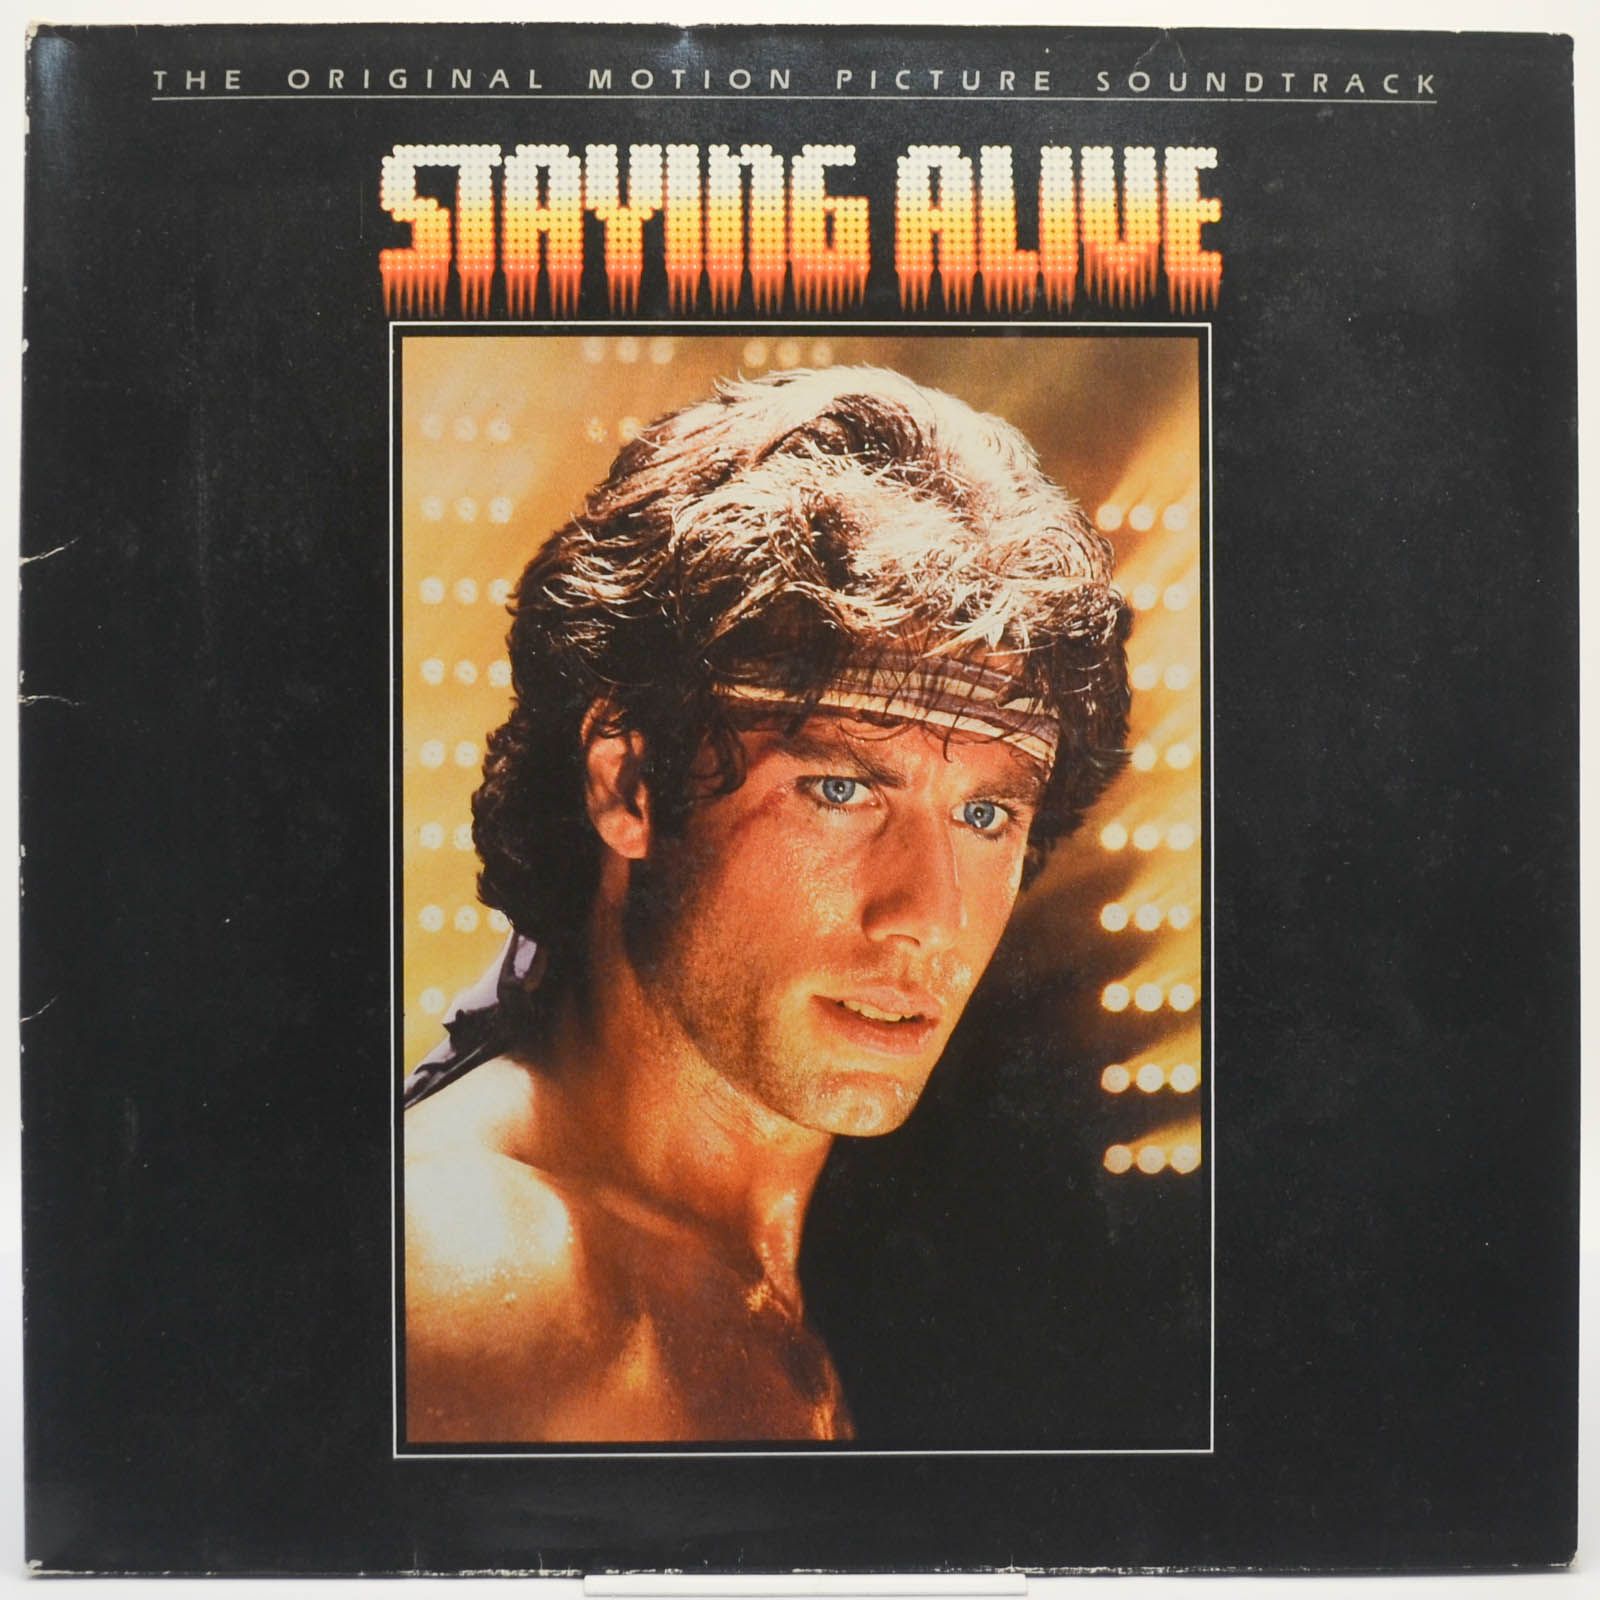 Various — Staying Alive (The Original Motion Picture Soundtrack), 1983